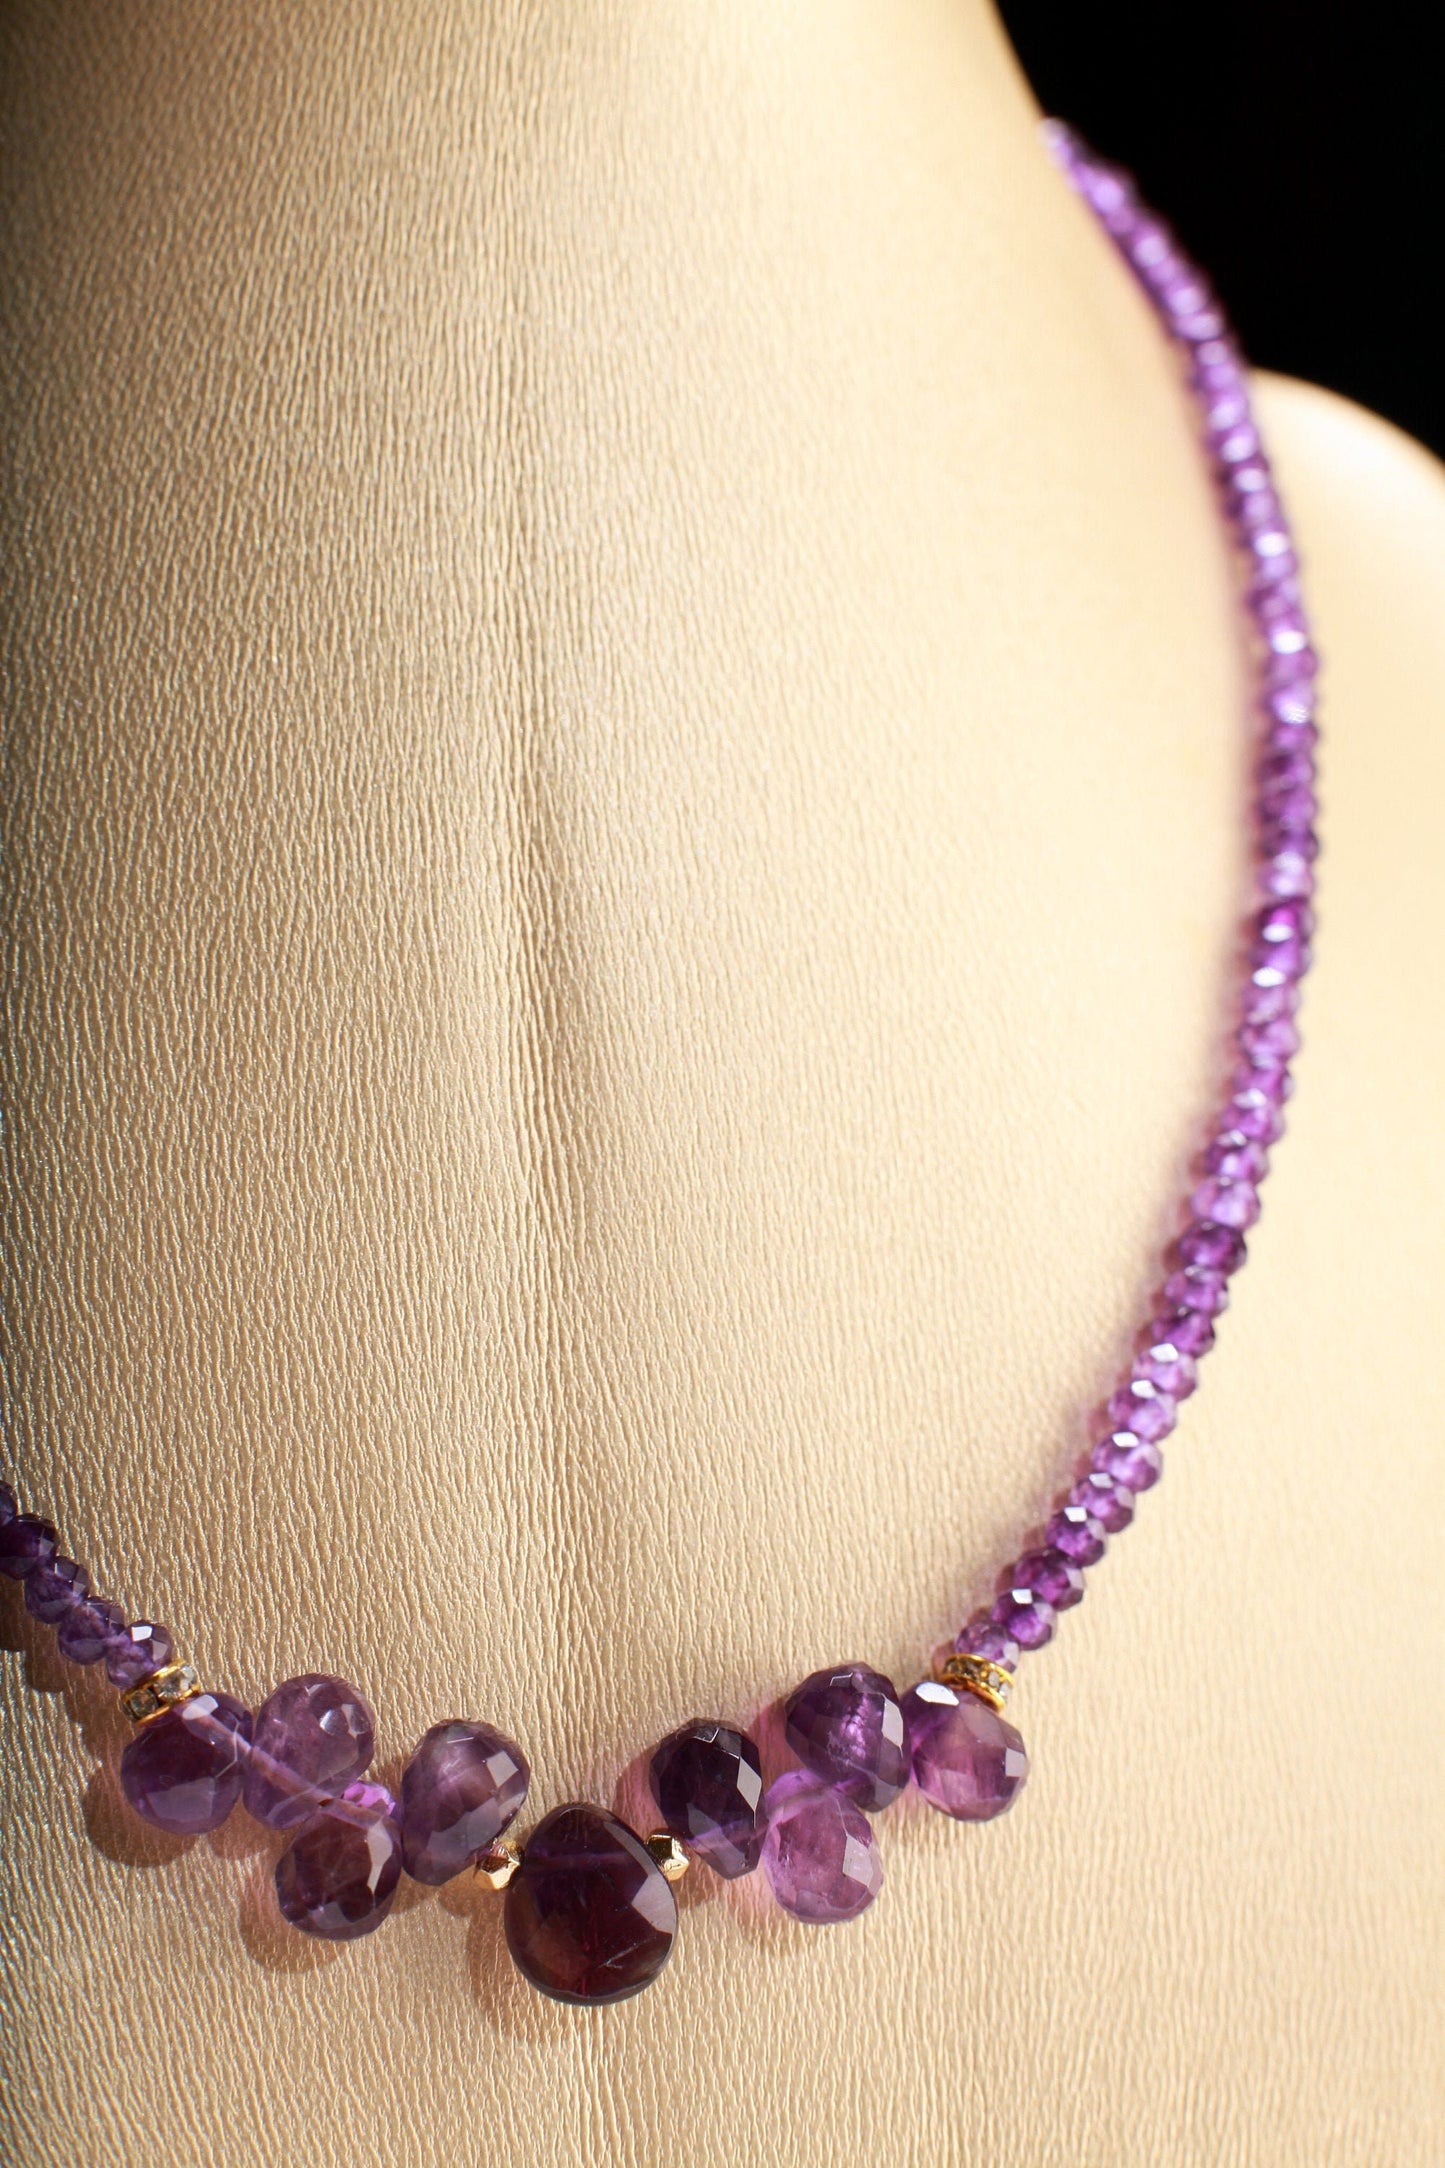 Natural Amethyst Faceted Briolette accent with Teardrop centerpiece 16&quot; Necklace with 2&quot; Extension Chain